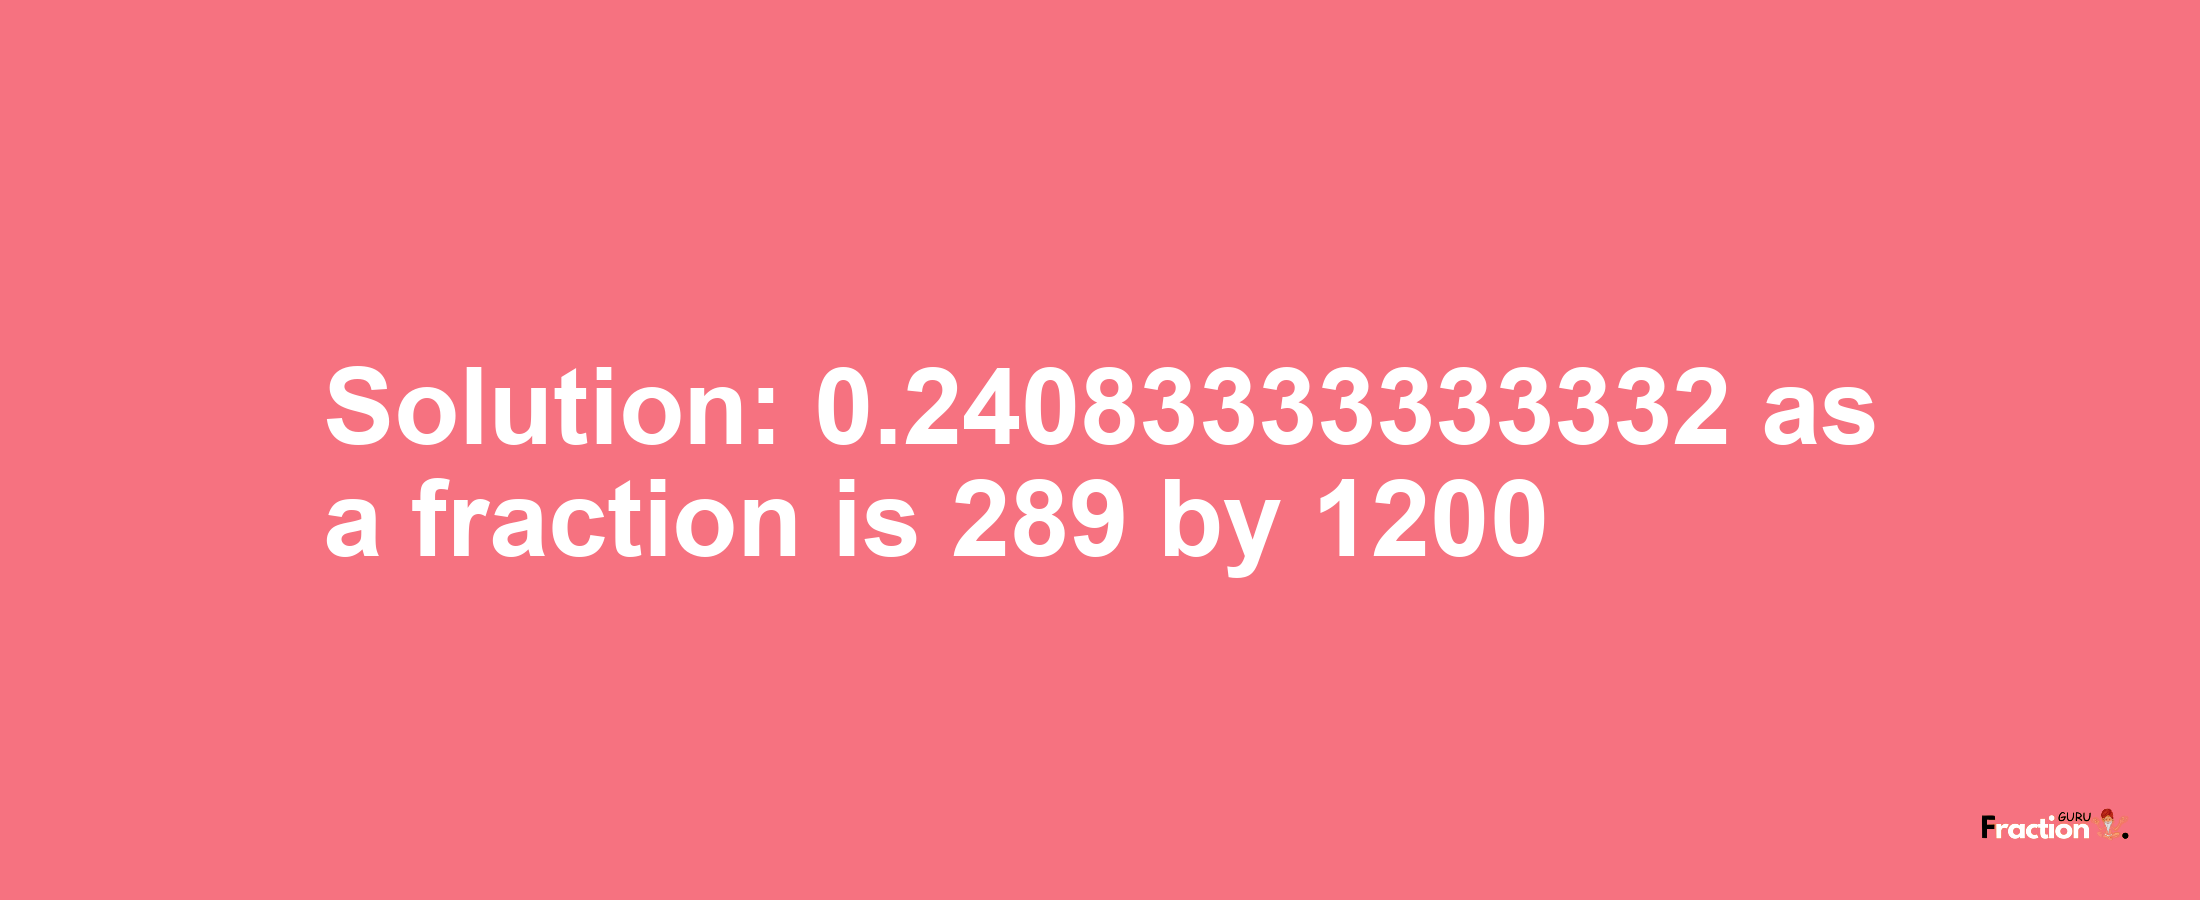 Solution:0.24083333333332 as a fraction is 289/1200